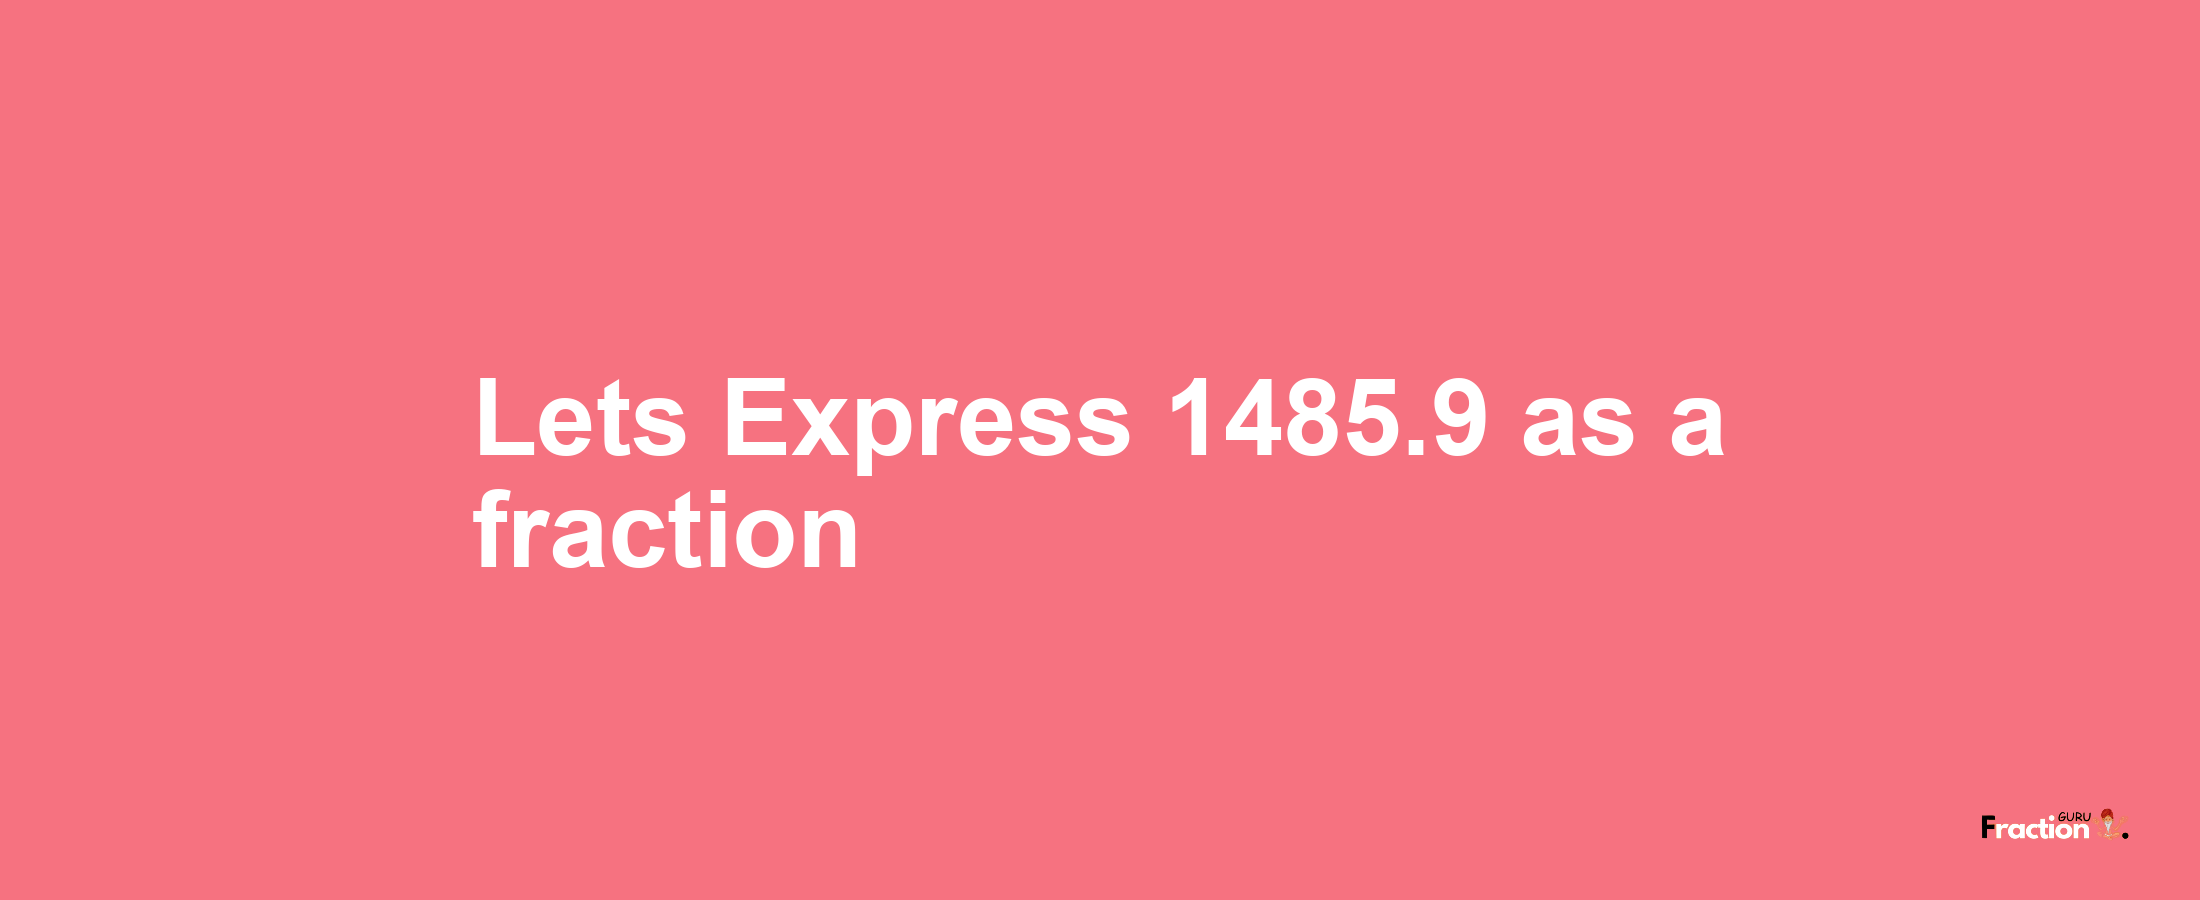 Lets Express 1485.9 as afraction